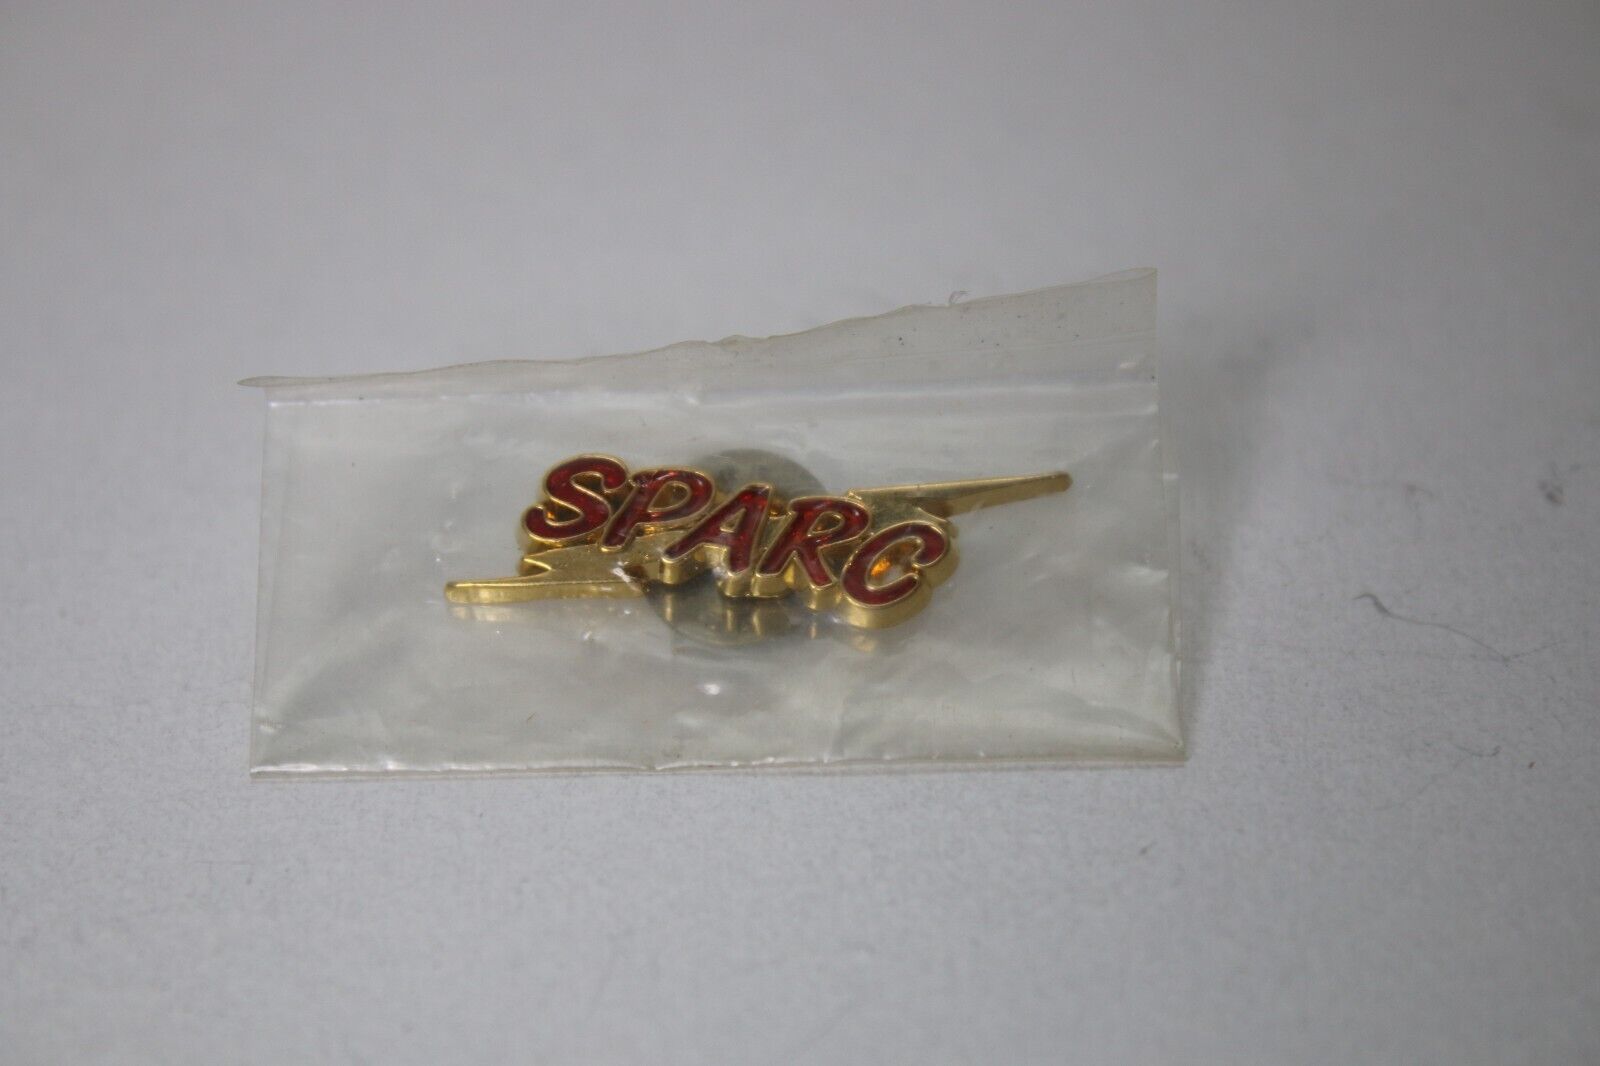 Vintage Wendy\'s Old Fashioned Hamburgers SPARC Employee Lapel Pin